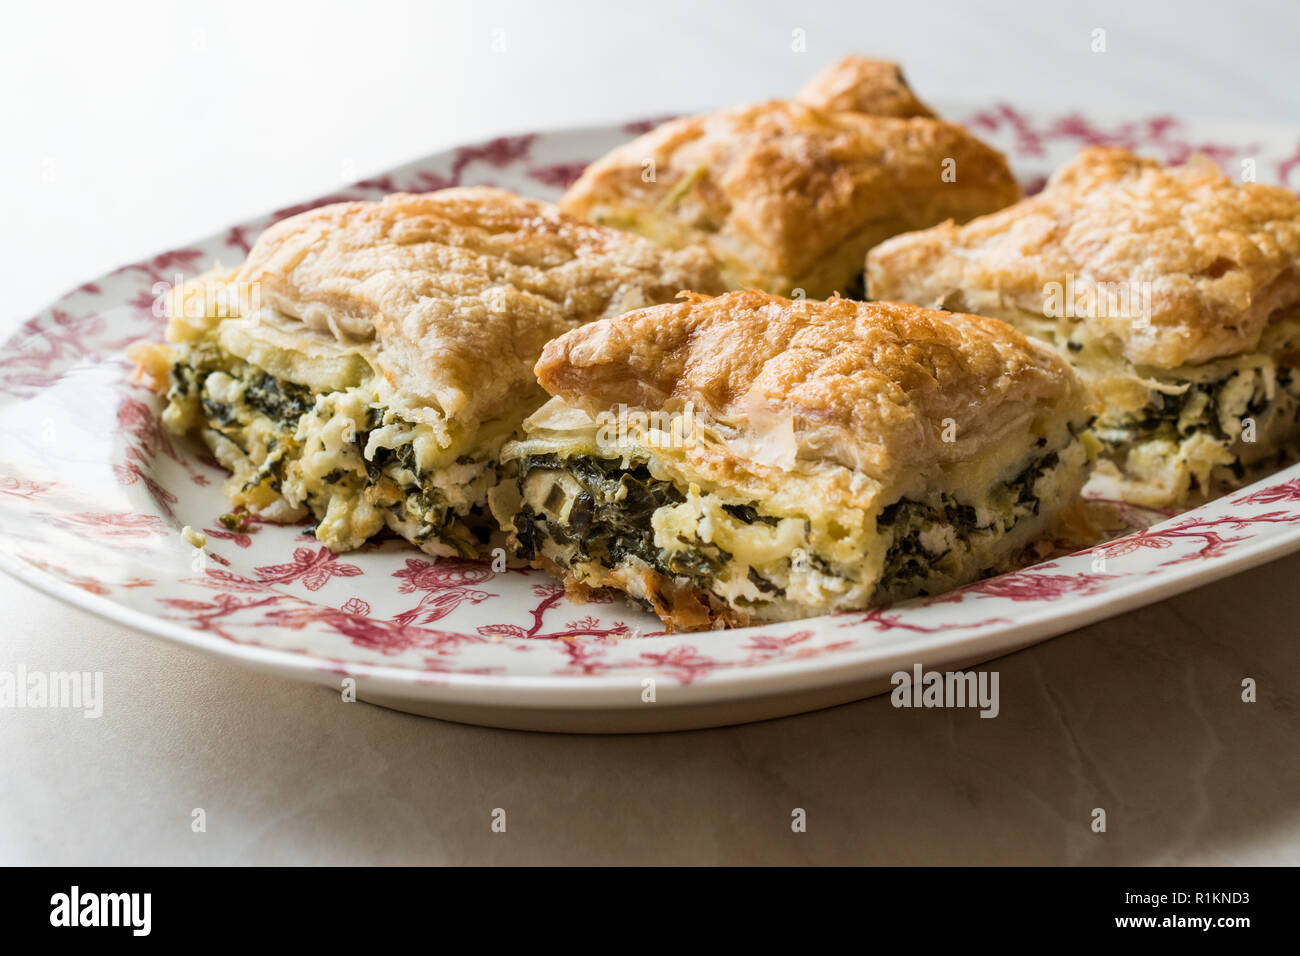 Turkish Borek Talas Boregi / Burek with Spinach and Cheese made with Mille Feuille. Traditional Food. Stock Photo